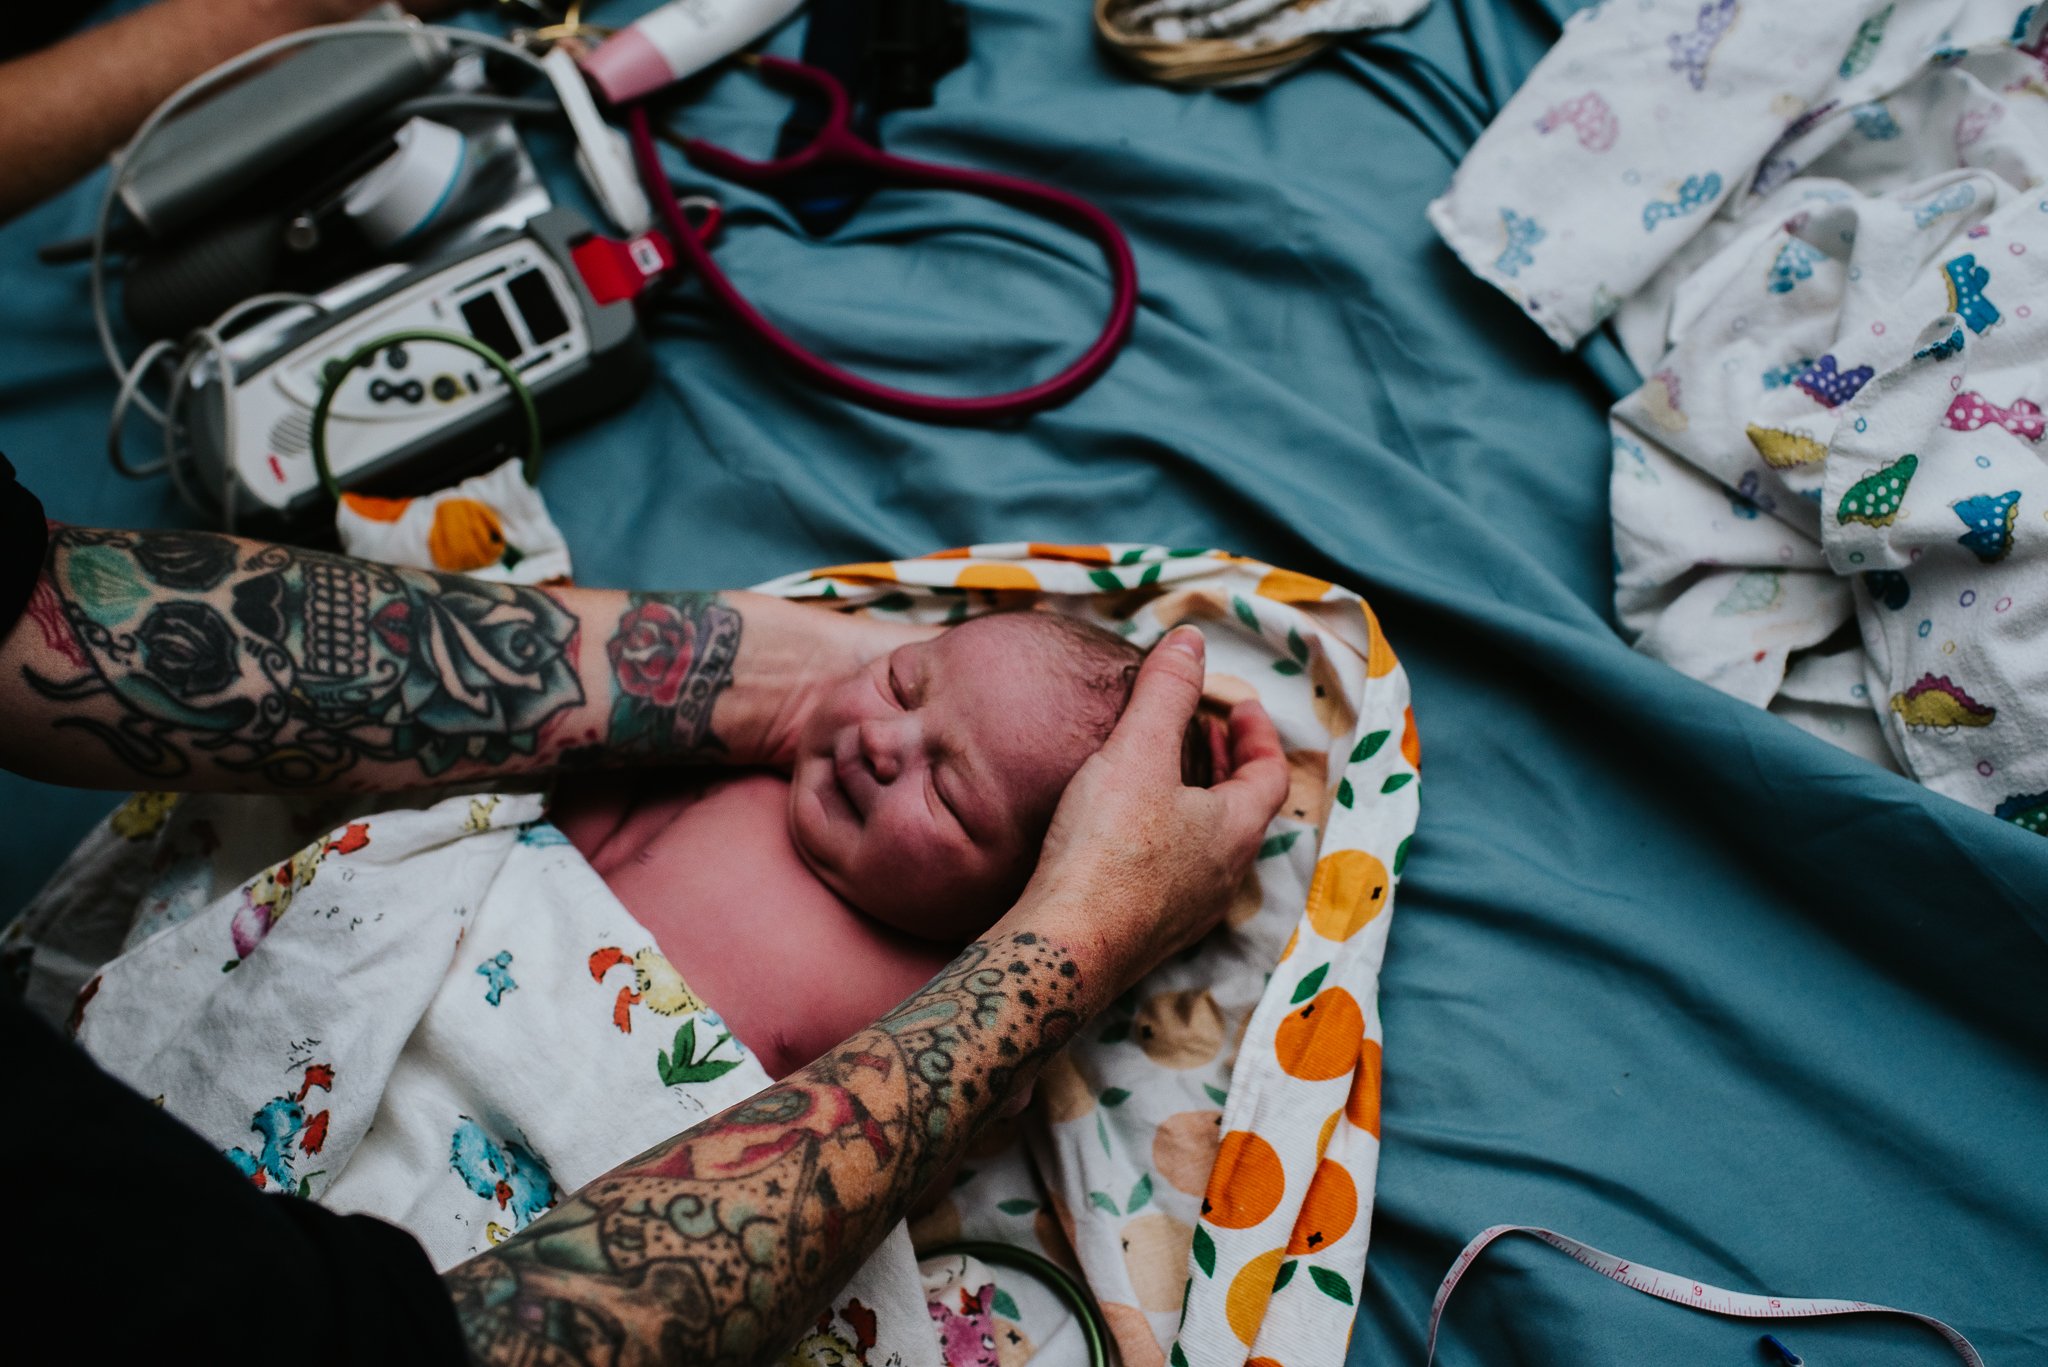 Newborn-exam-documented-by-Badger-and-Quill-Photography